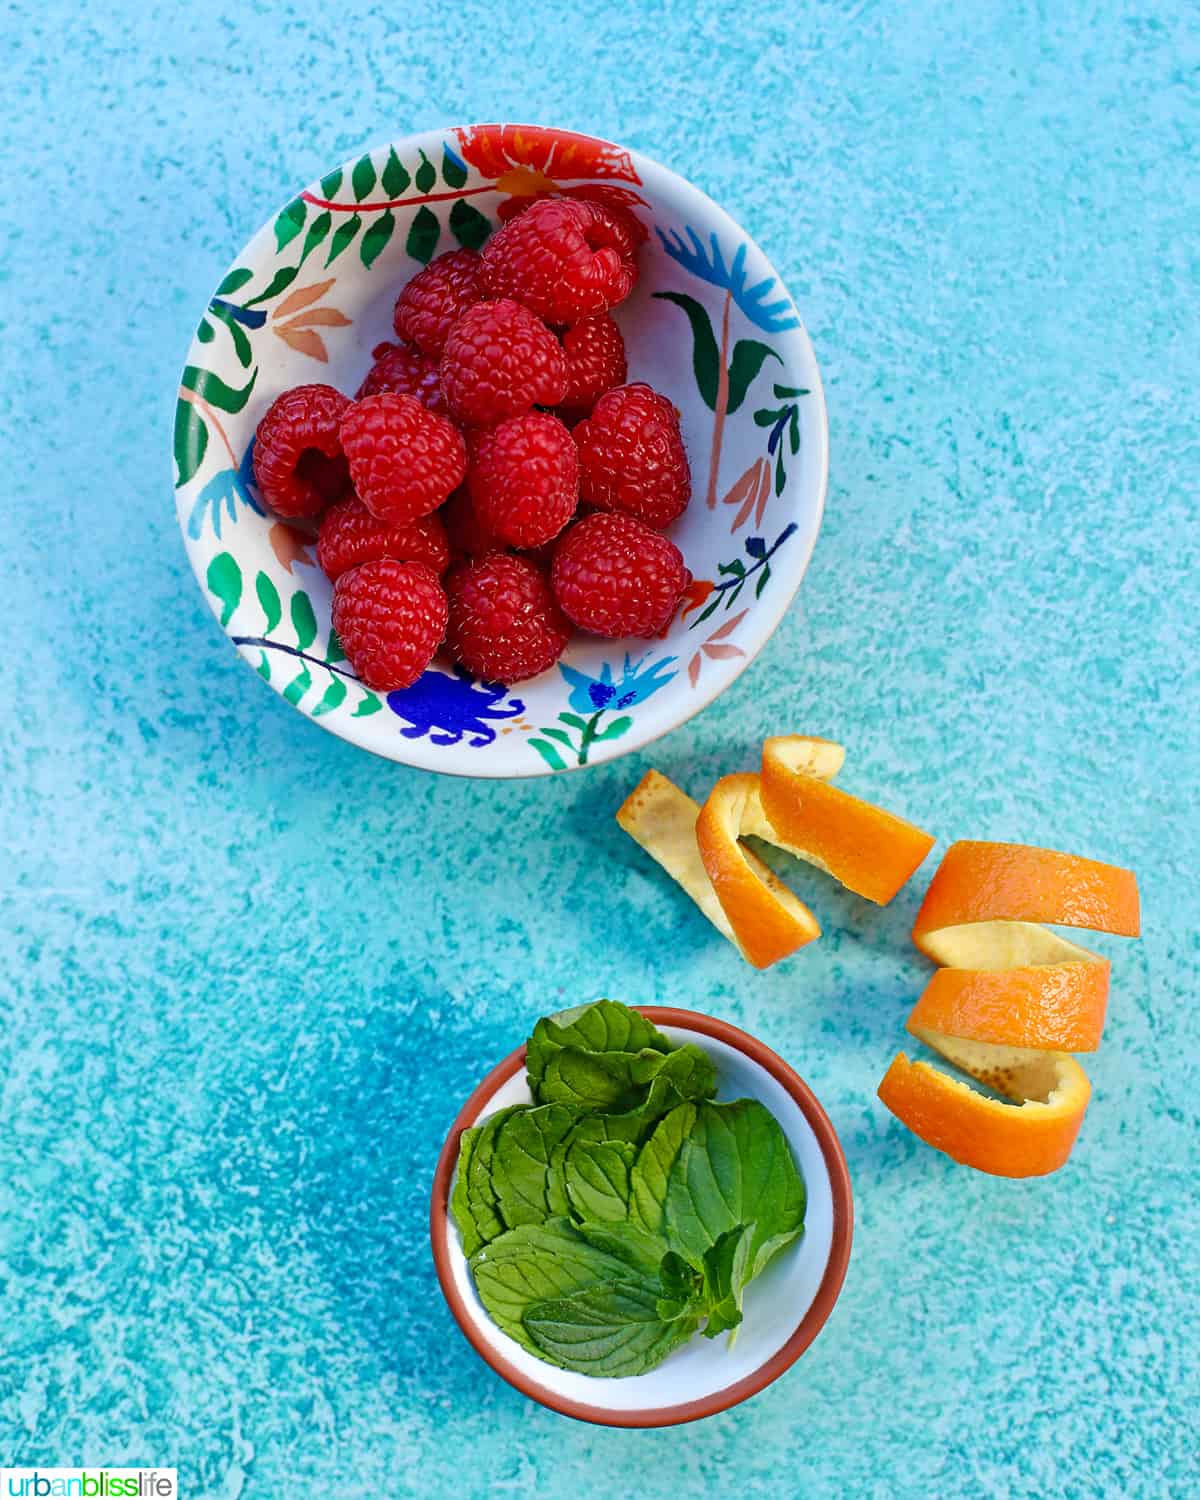 bowls of raspberries, mint leaves, orange rind garnishes for raspberry mimosas on blue background.